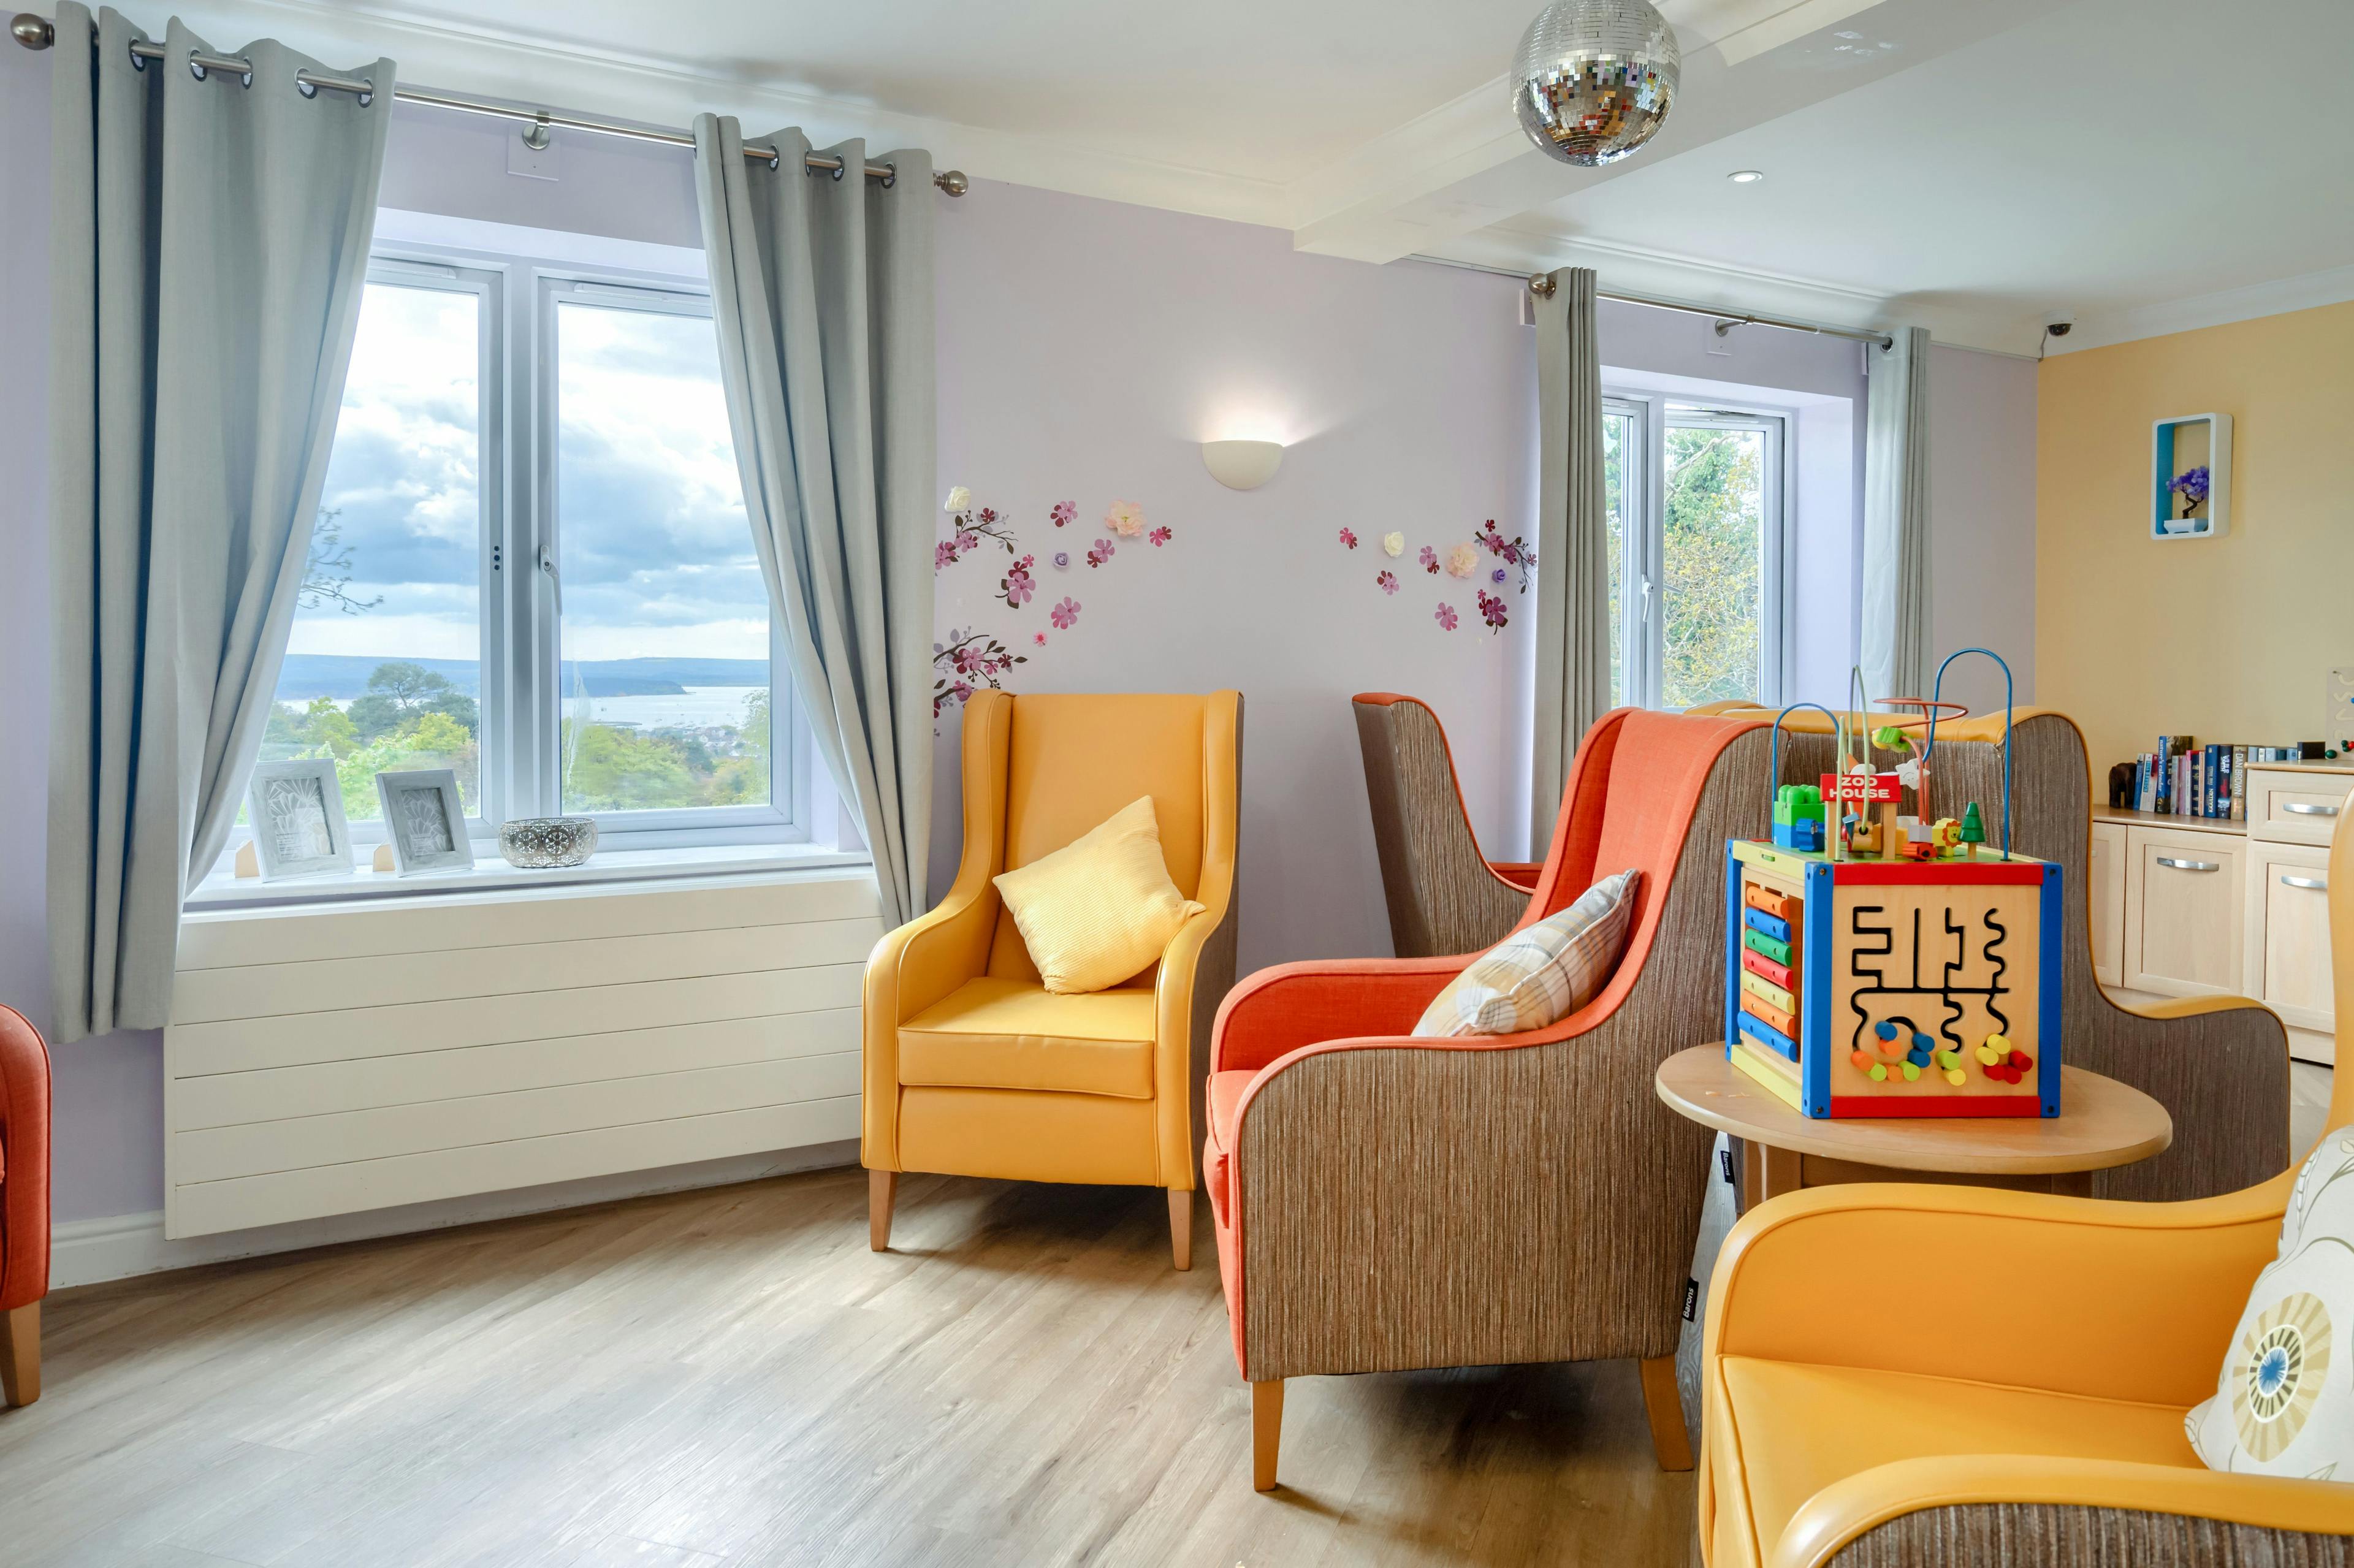 Lounge of Regency Manor Care Home in Poole, Dorset